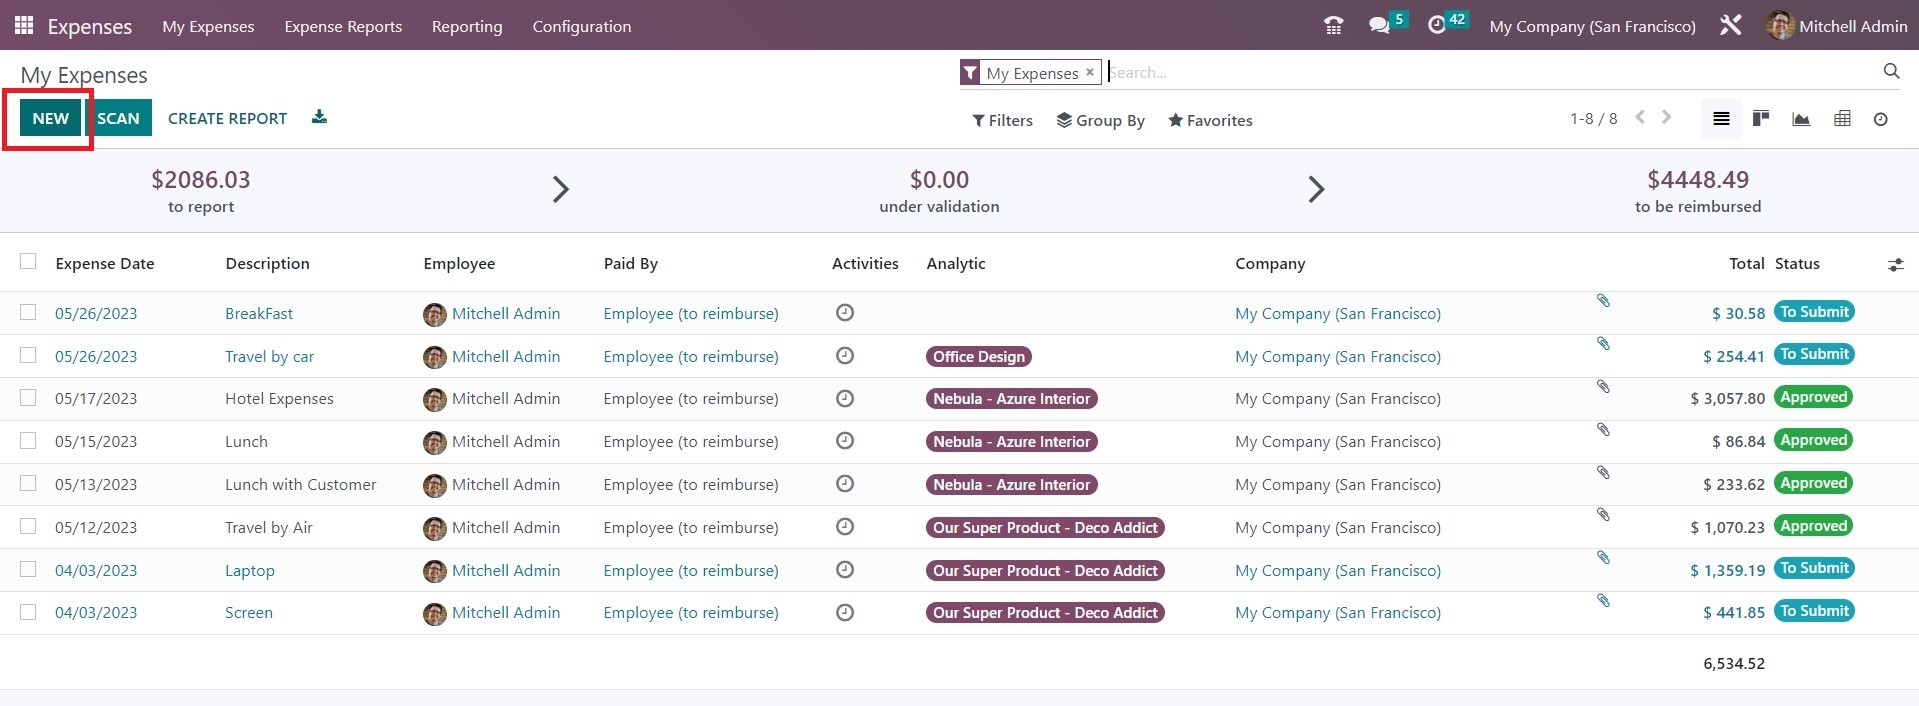 Reinvoicing Expenses To Customers in Odoo - 16 - Midis